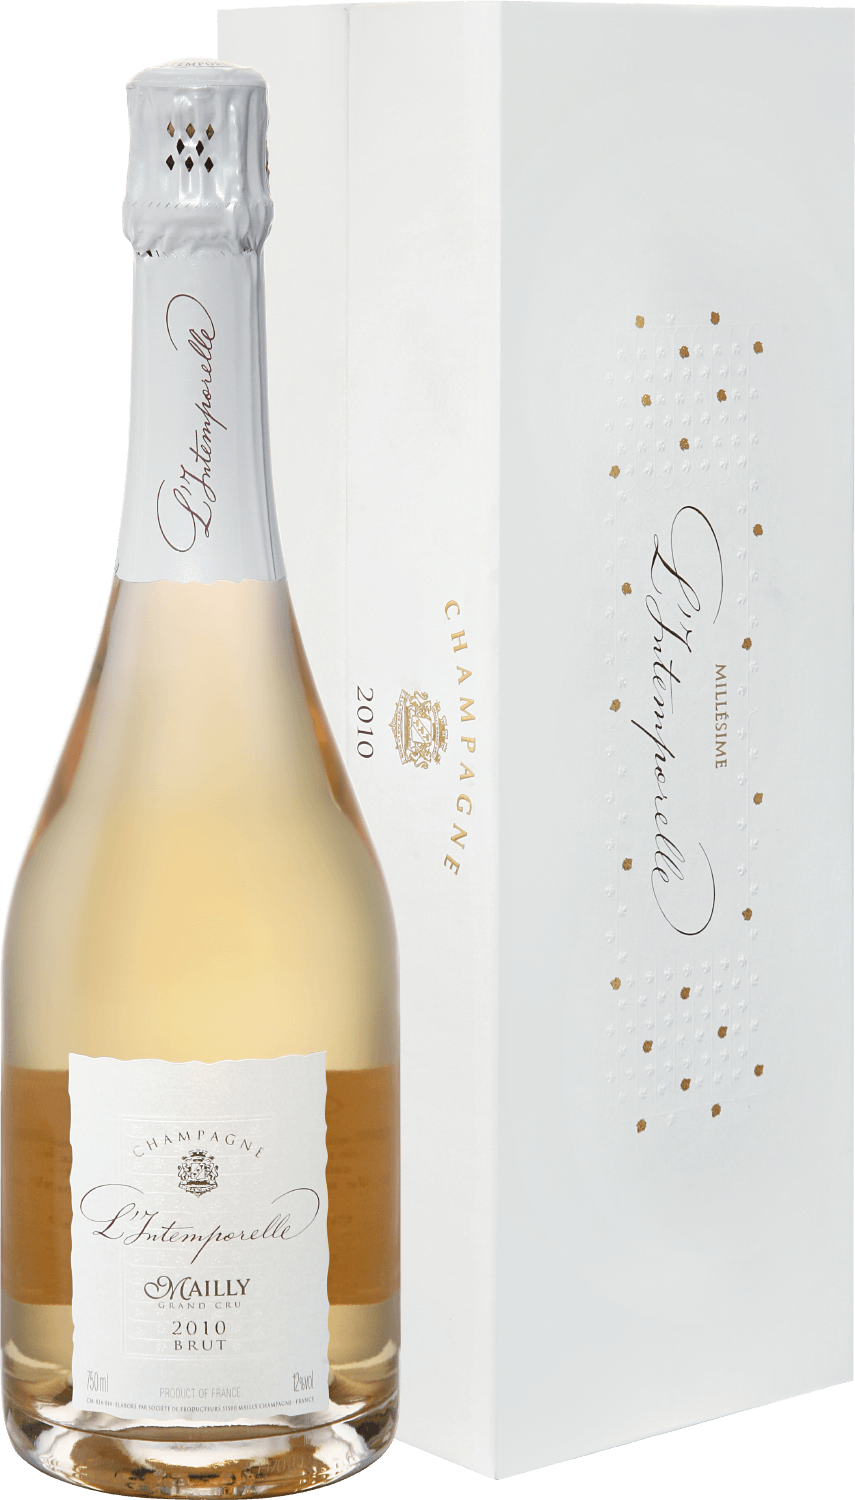 Mailly Grand Cru L’intemporelle Brut Millesime Champagne АОС (gift box) mailly grand cru brut blanc de pinot noir champagne аос